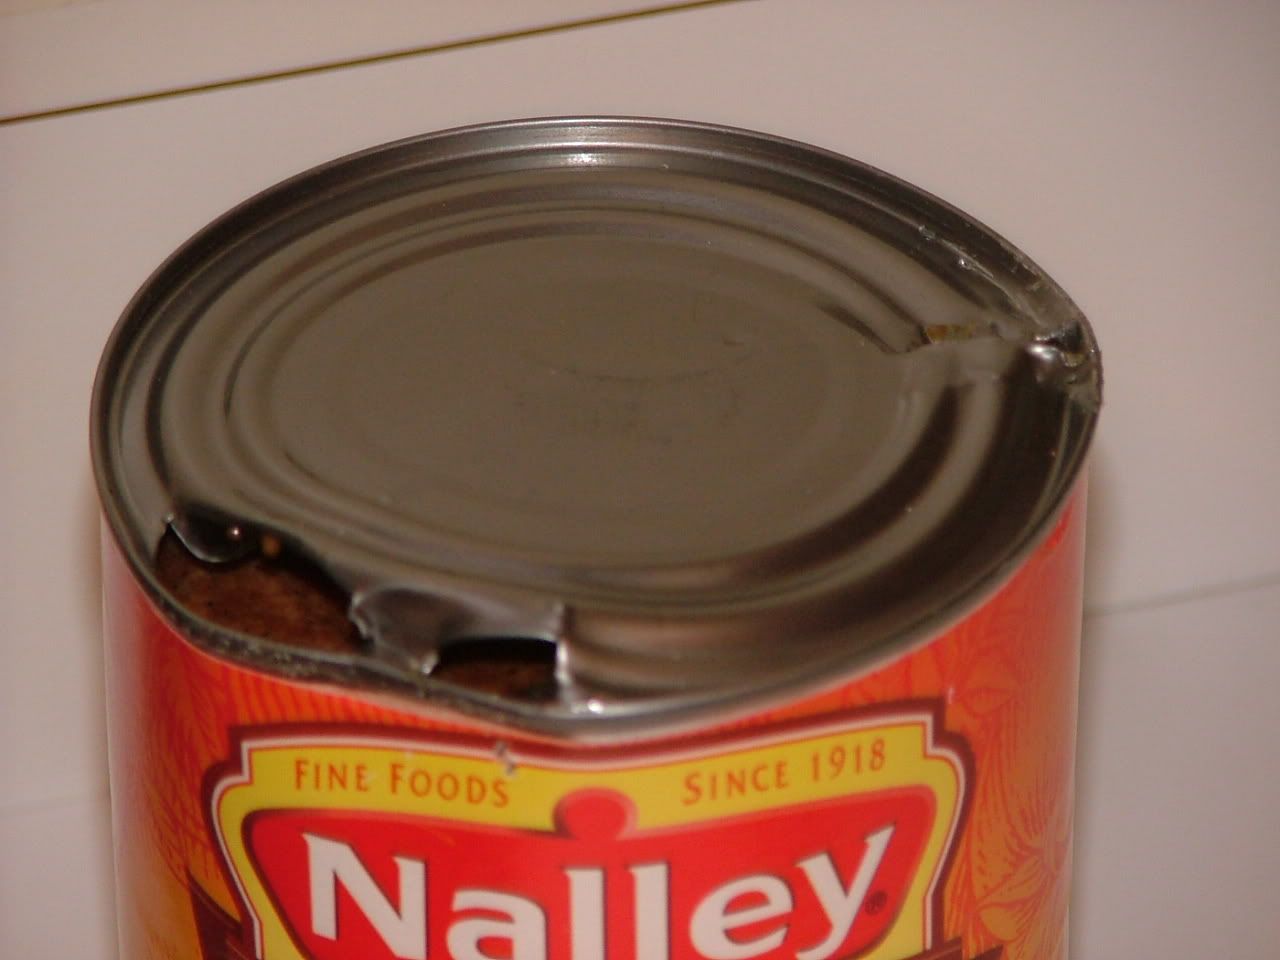 You'll never taste my meaty goodness, said the Nalley chili can to Ed O.